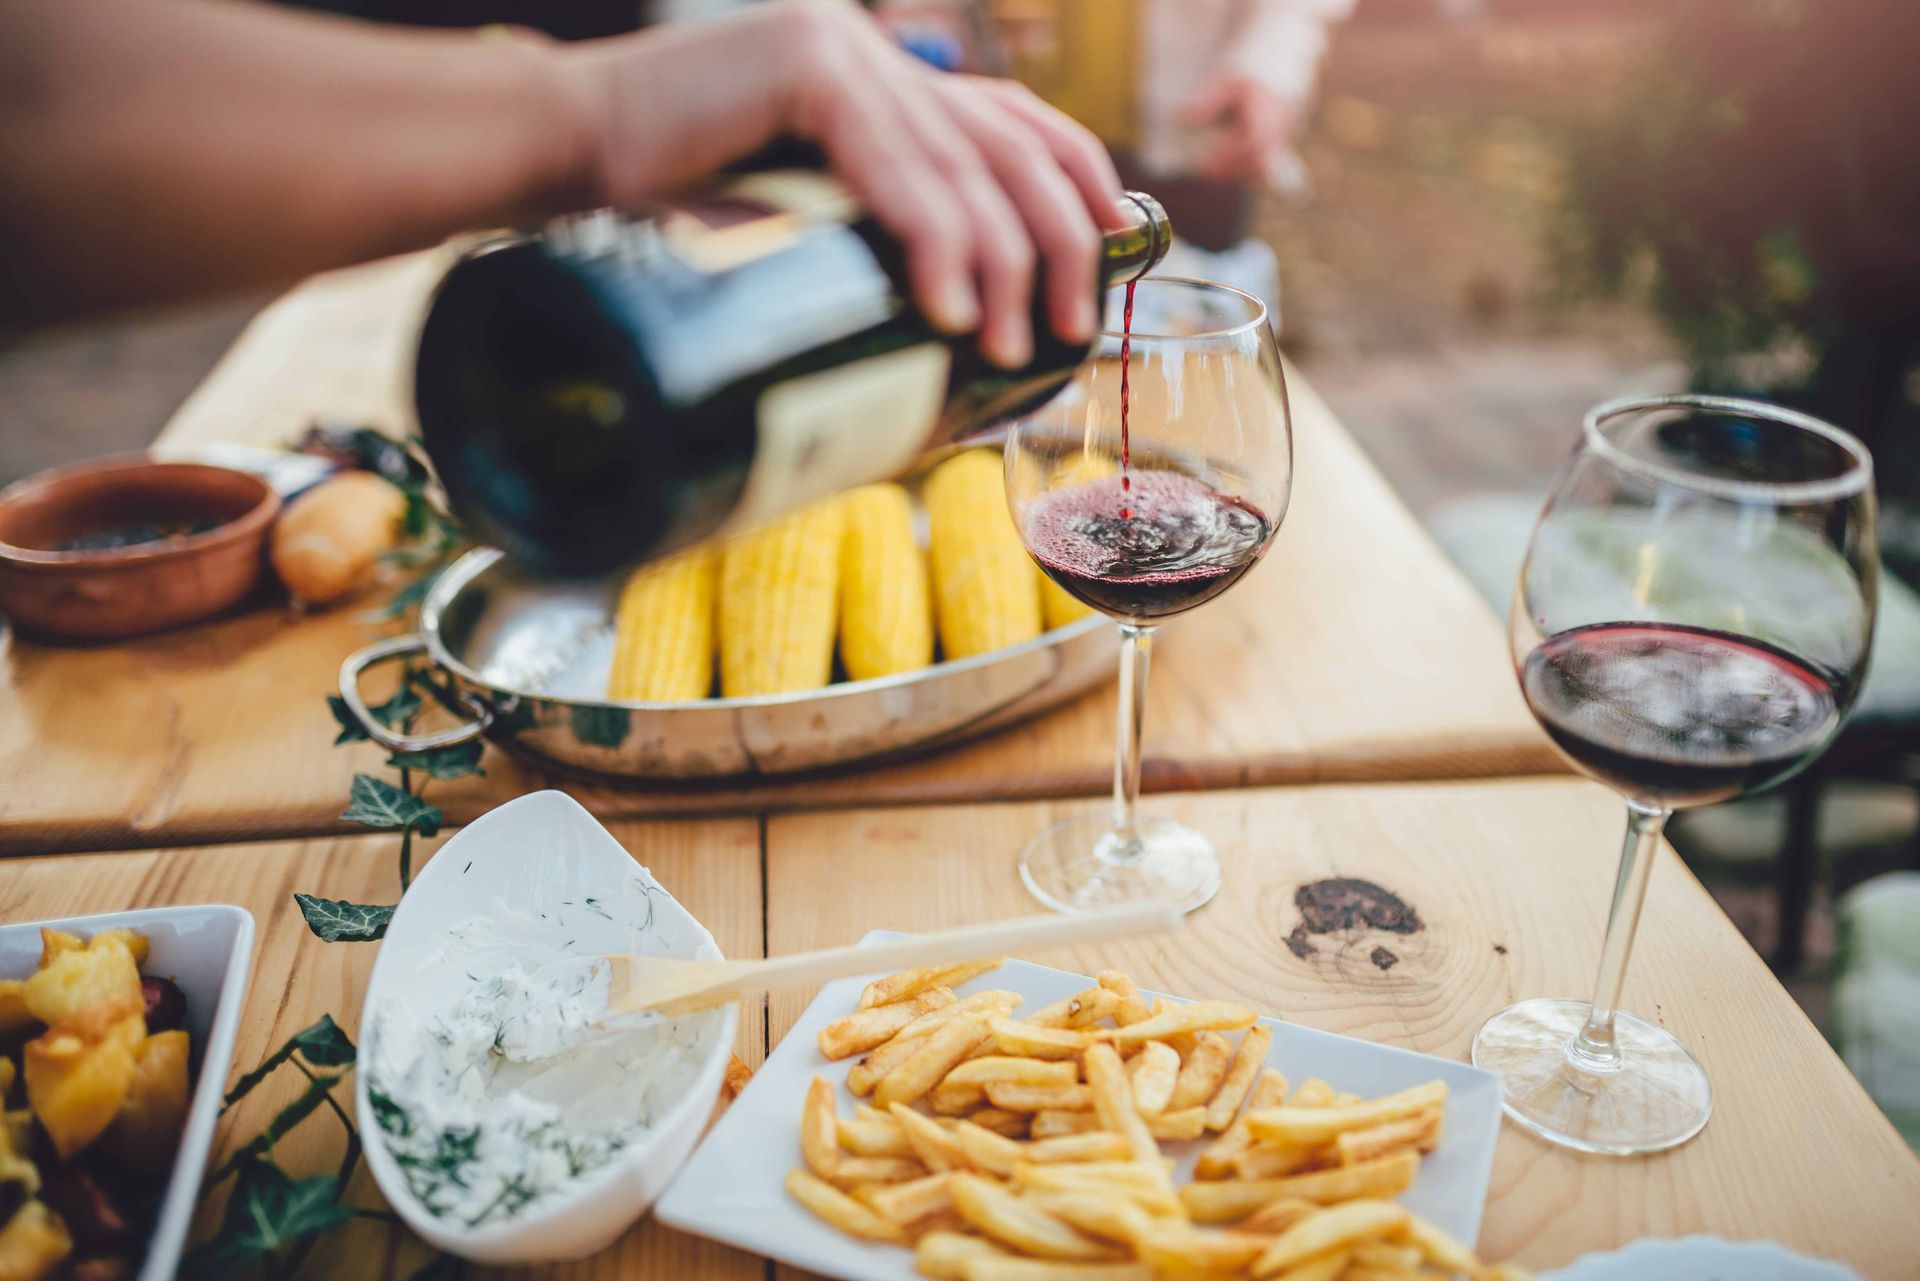 Professional Photograph of Wine and a Summer Meal